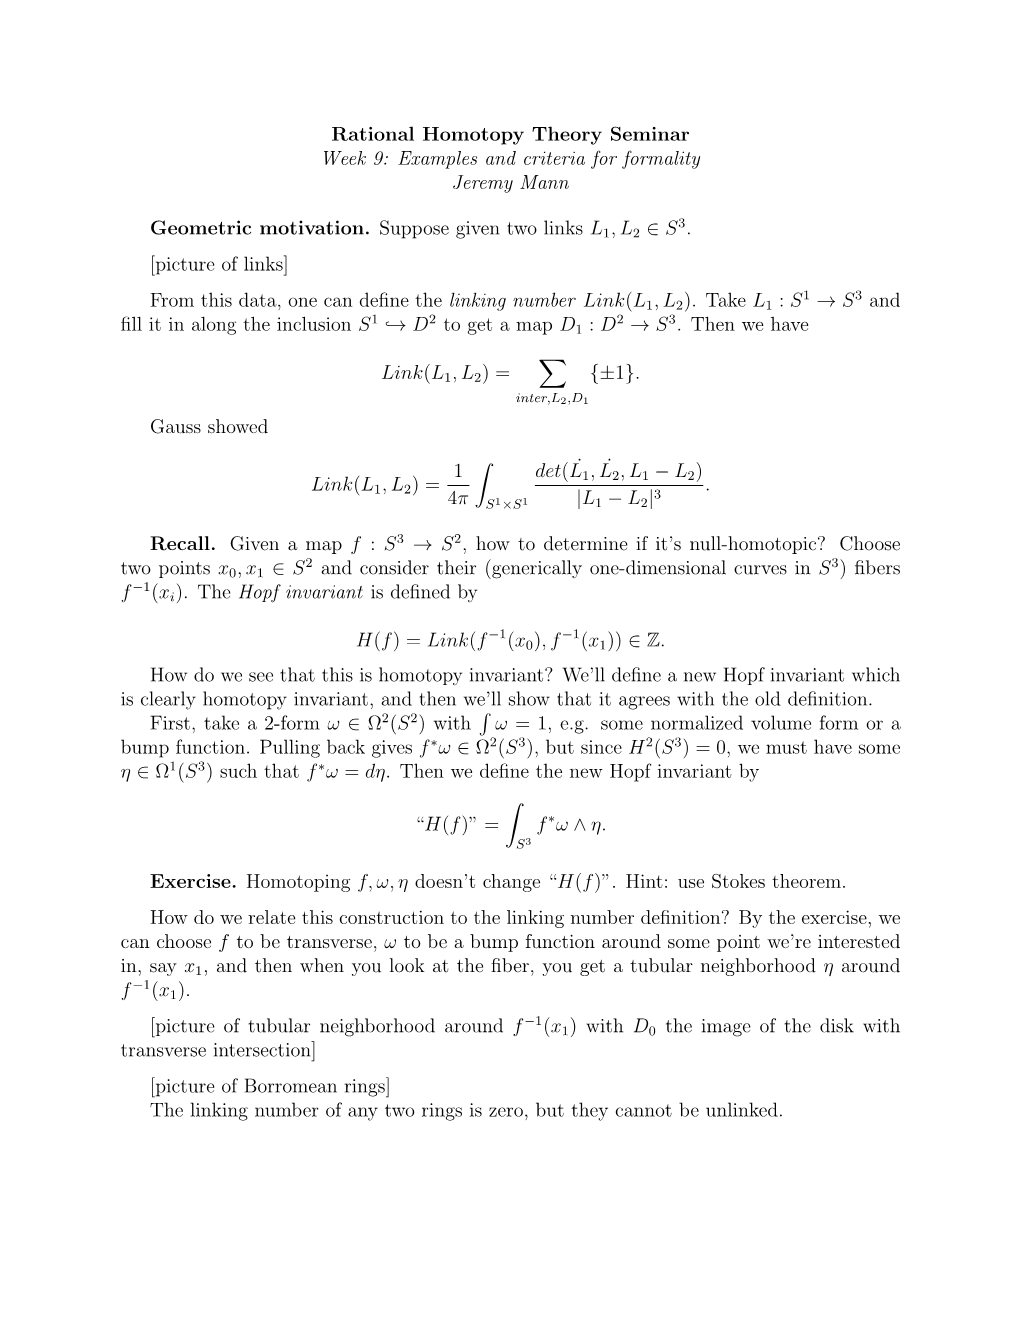 Rational Homotopy Theory Seminar Week 9: Examples and Criteria for Formality Jeremy Mann